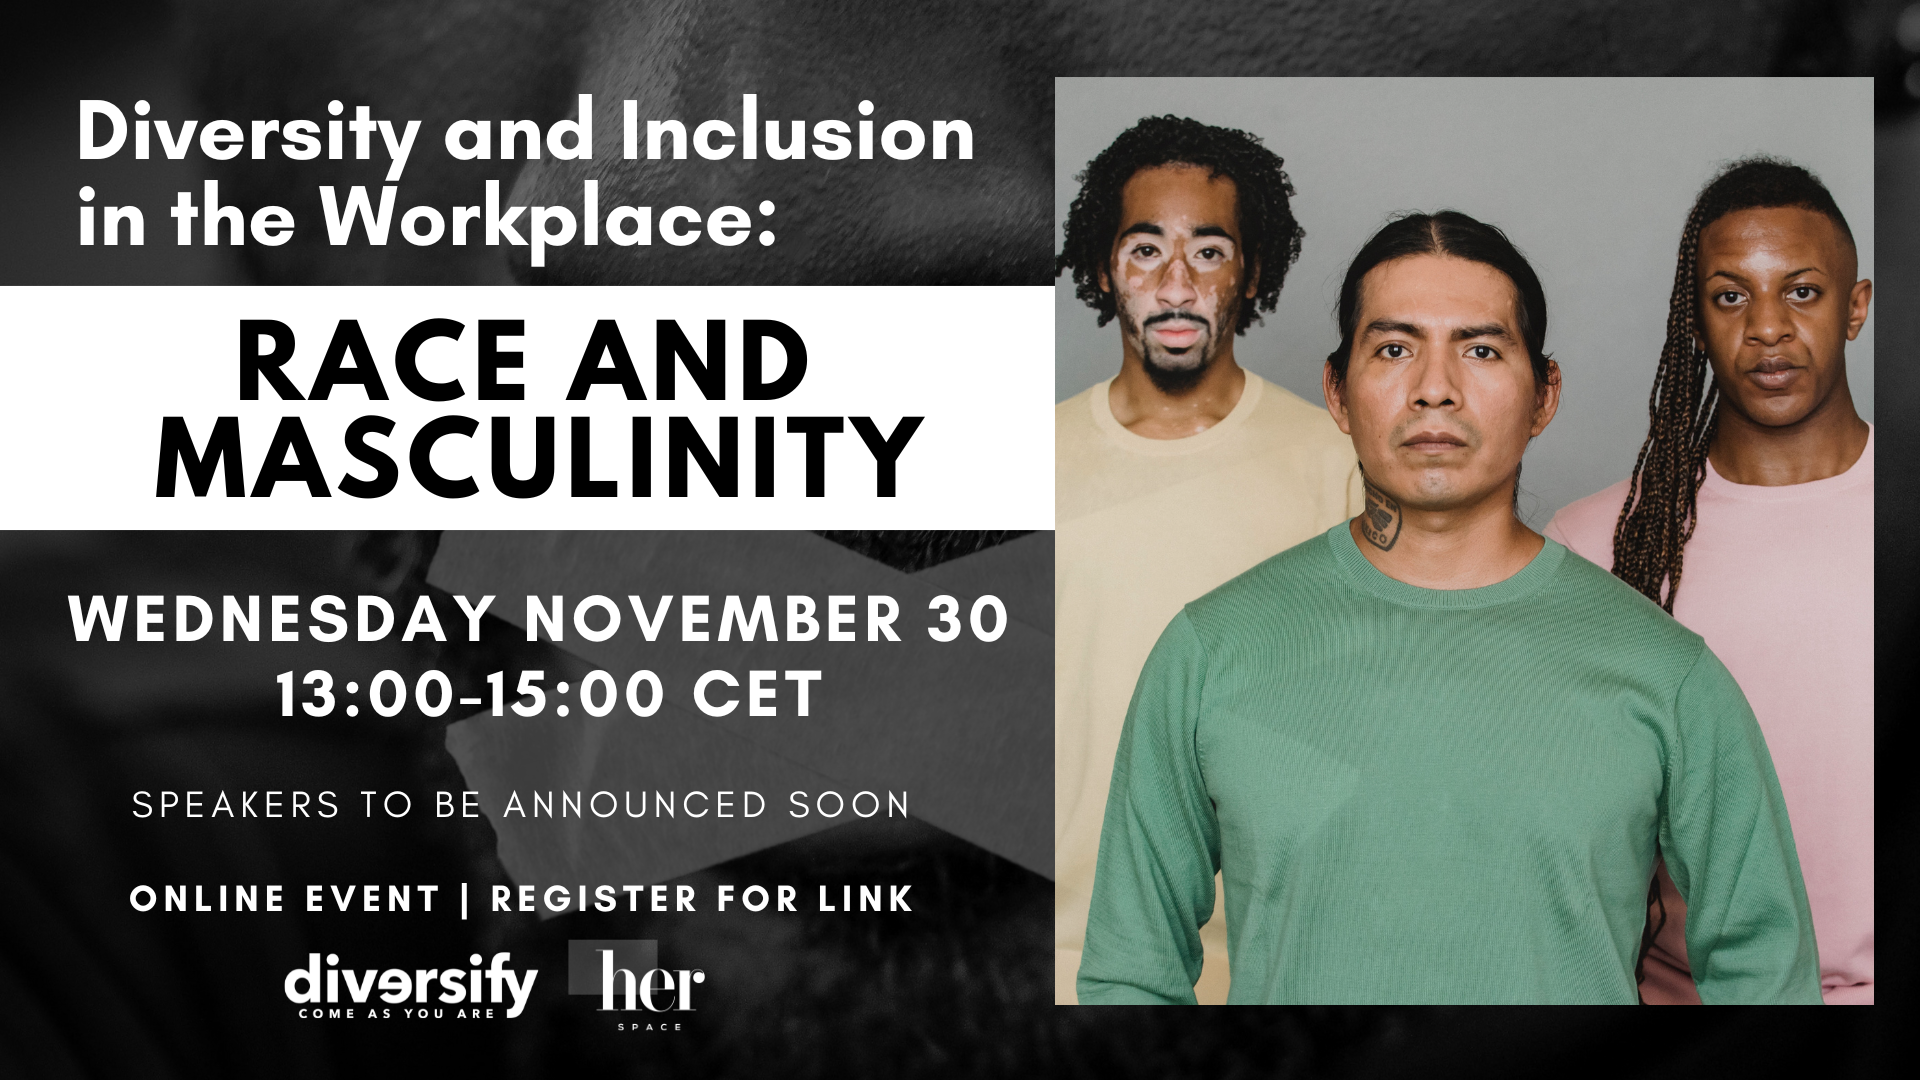 Diversity and Inclusion in the Workplace: Race and Masculinity